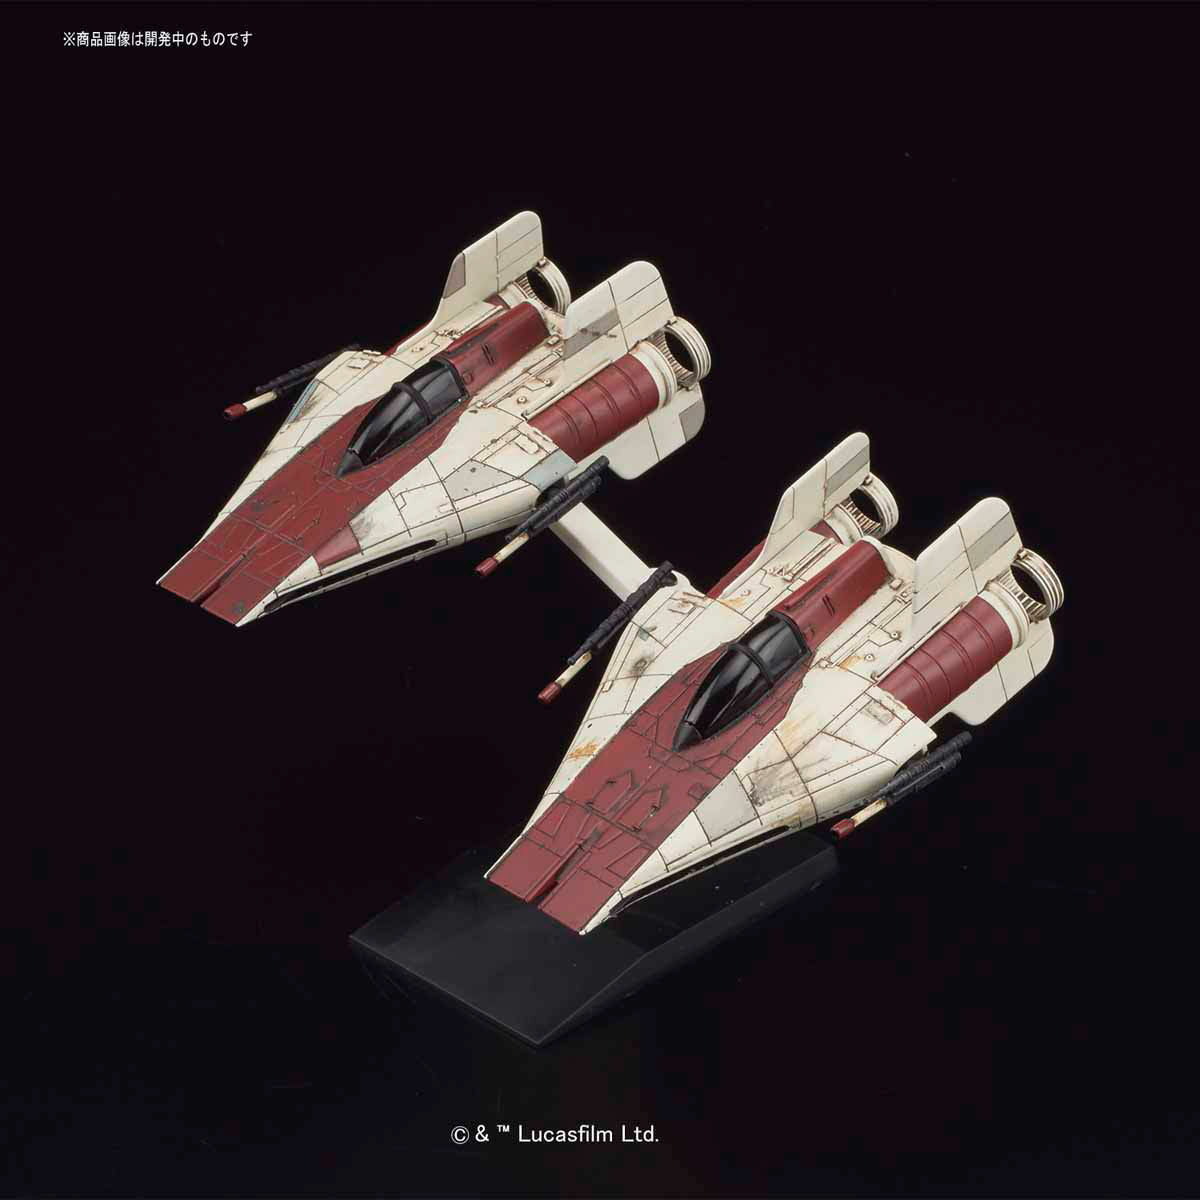 Vehicle Model 010 A-wing Starfighter